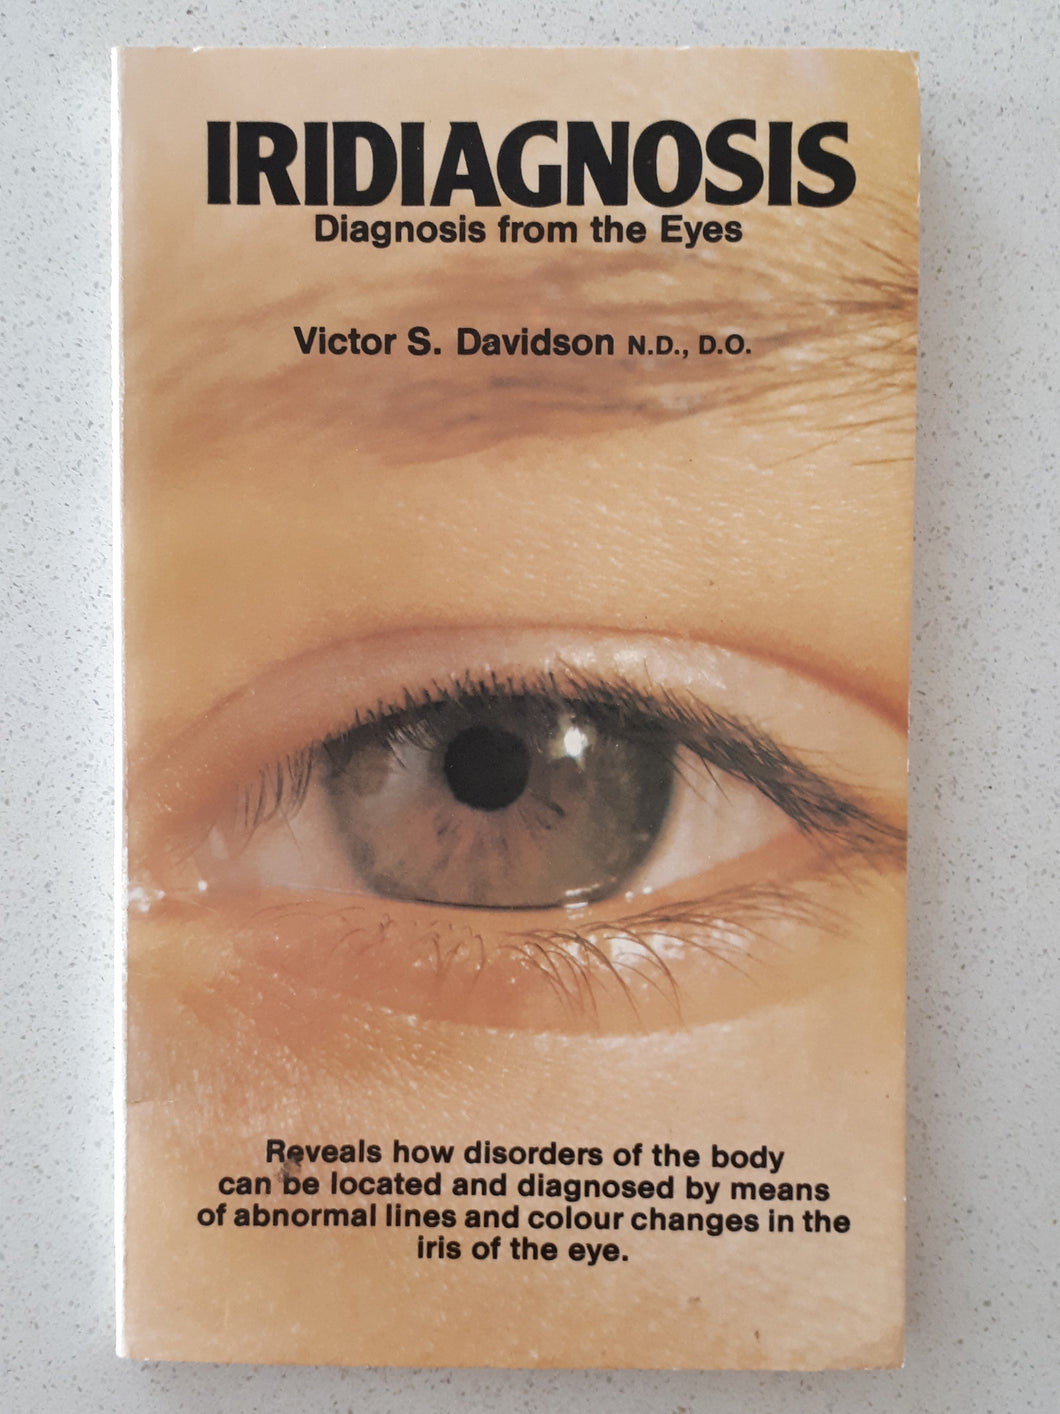 Iridiagnosis by Victor S. Davidson